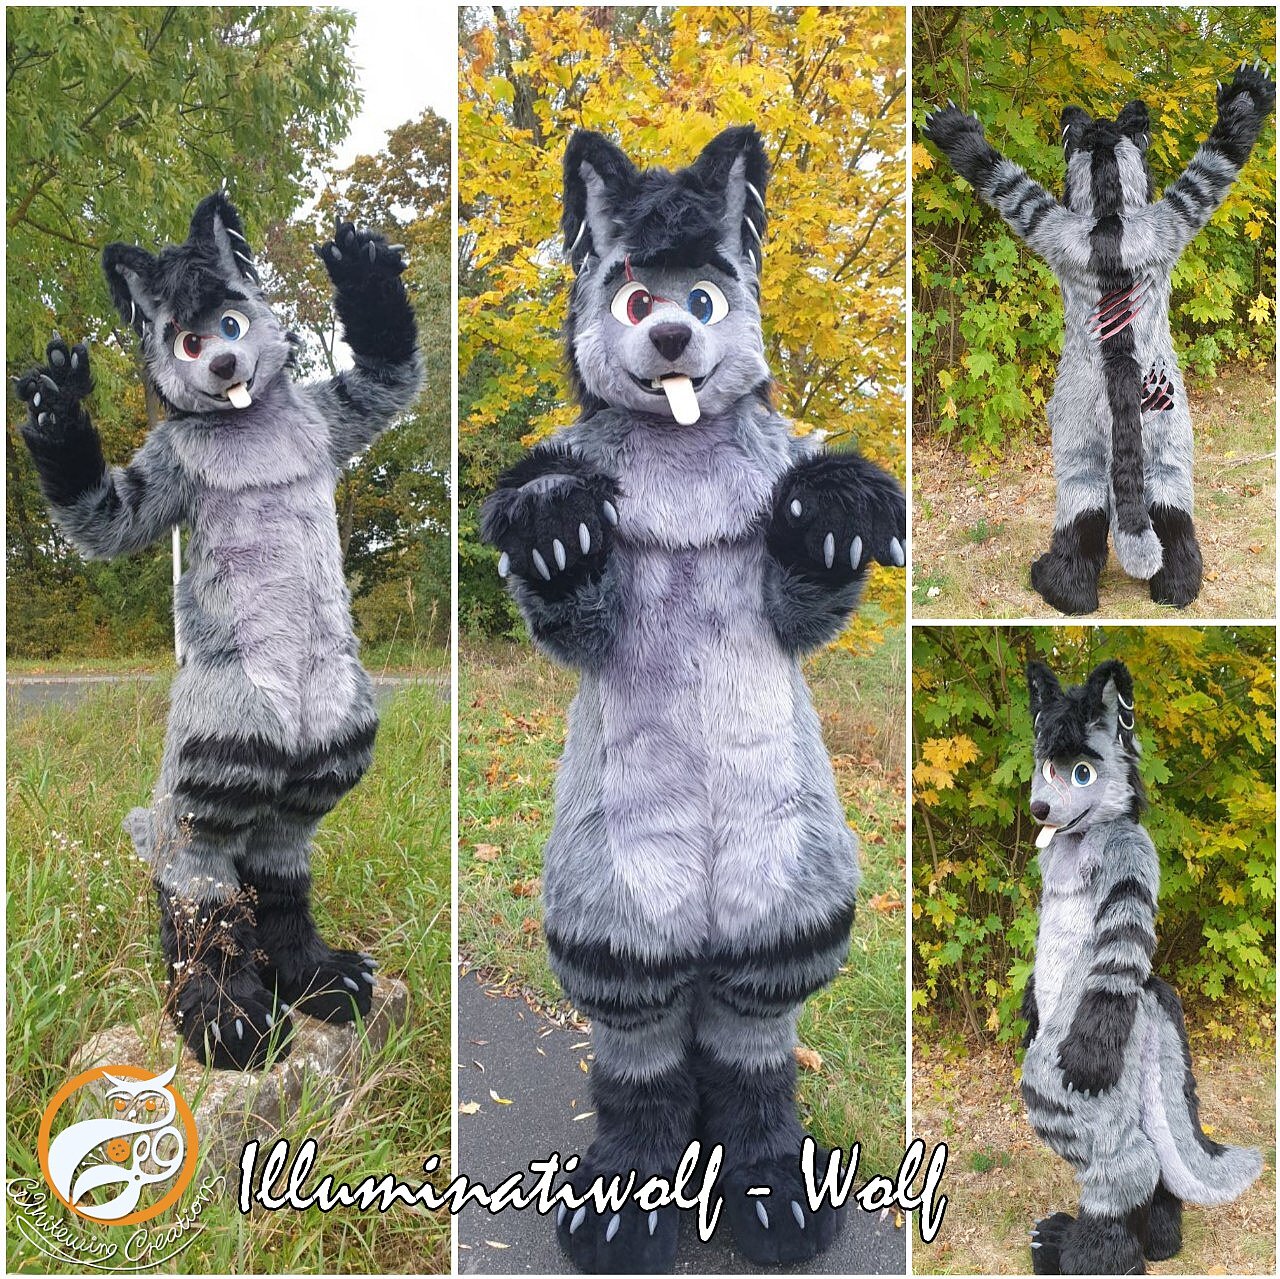 Illuminati - Full Fursuit made by WhitewingCreations - Fursuits made in Germany